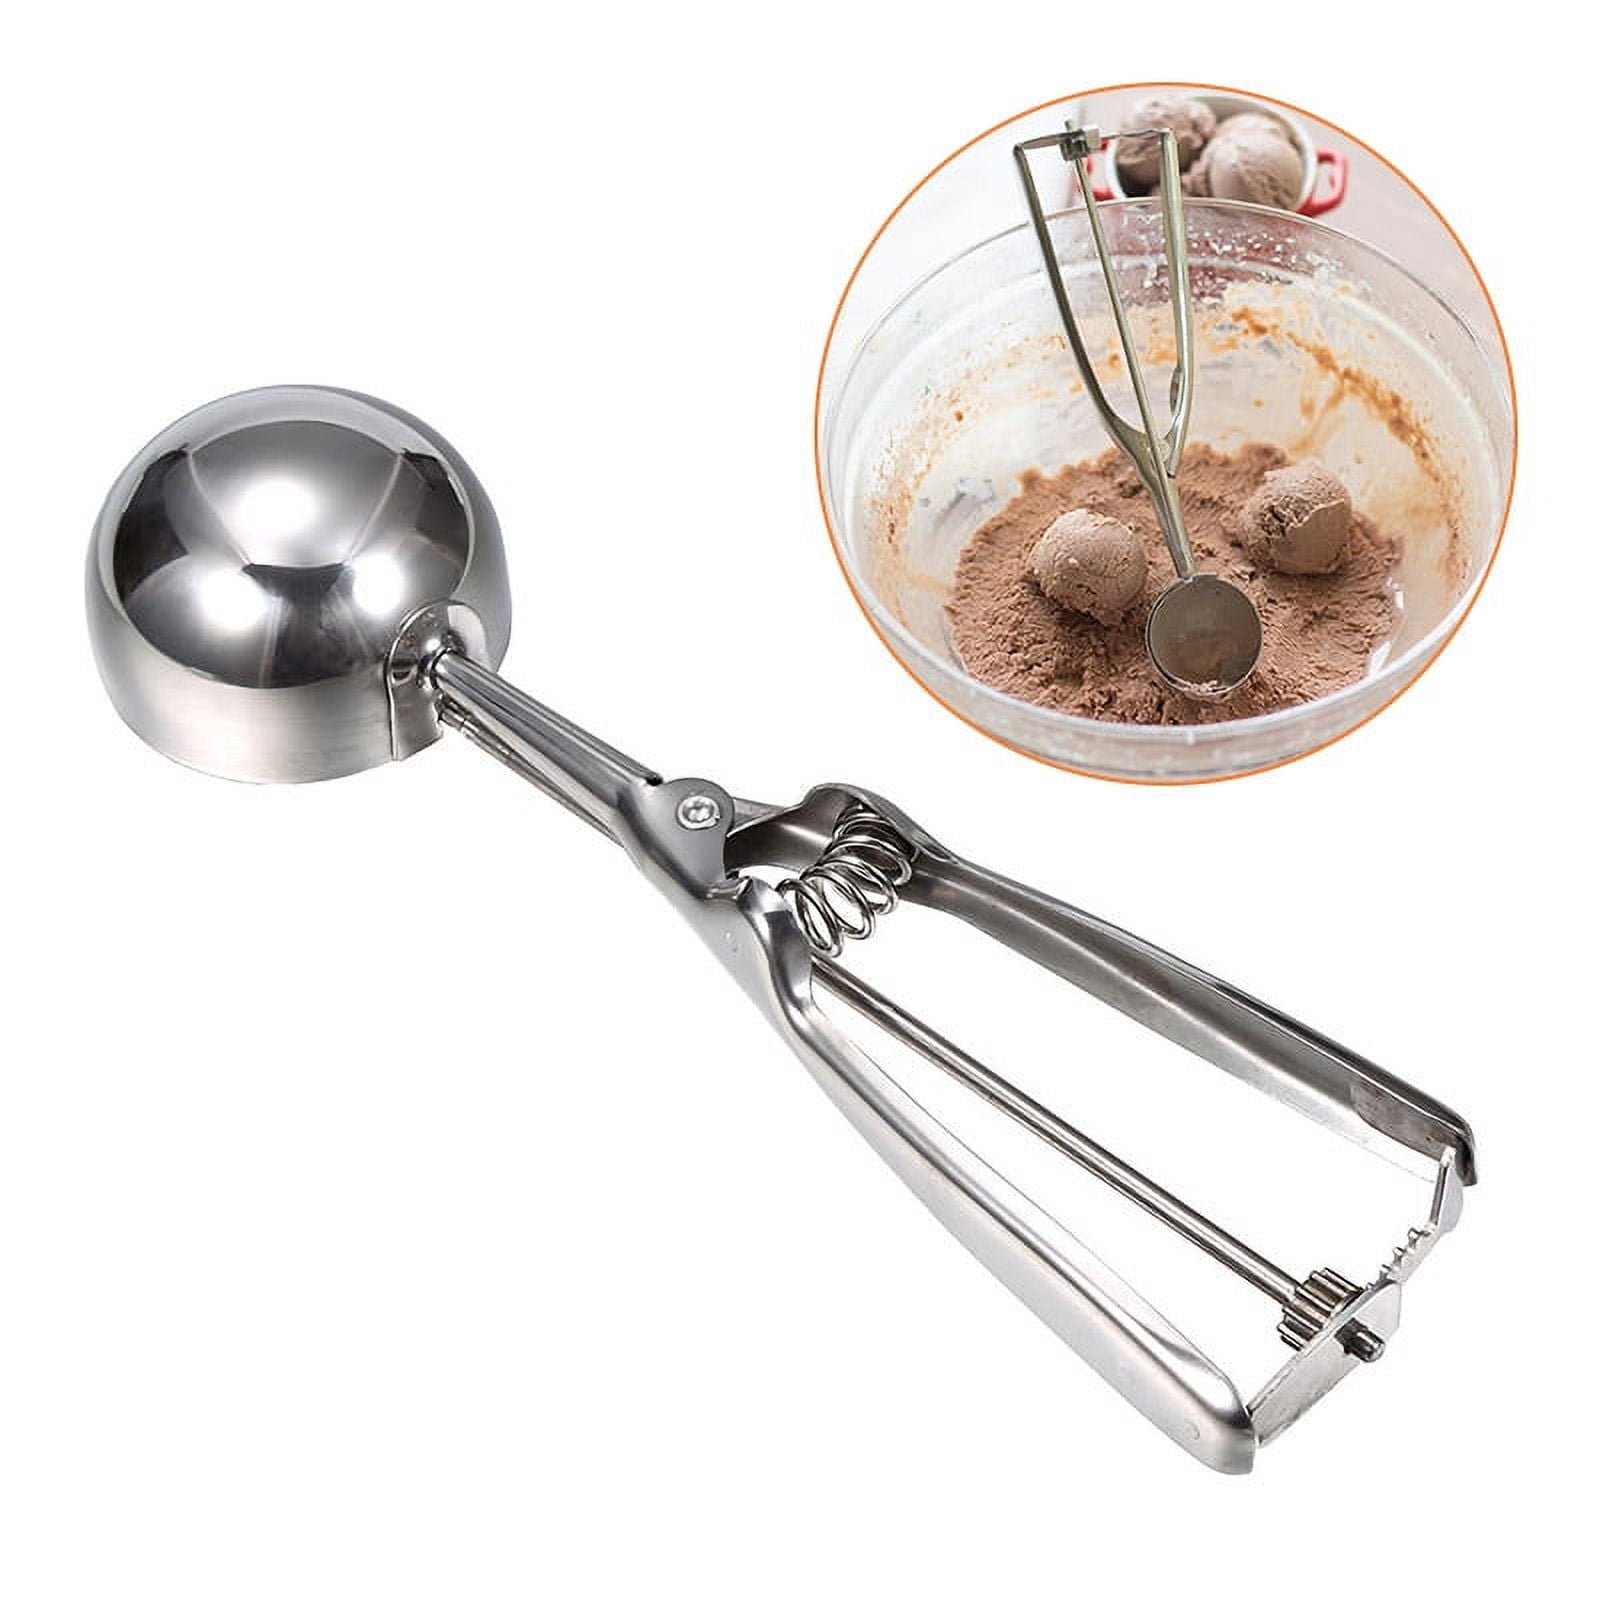 3 Sizes Stainless Steel Ice Cream Scoop Tool Cookie Watermelon